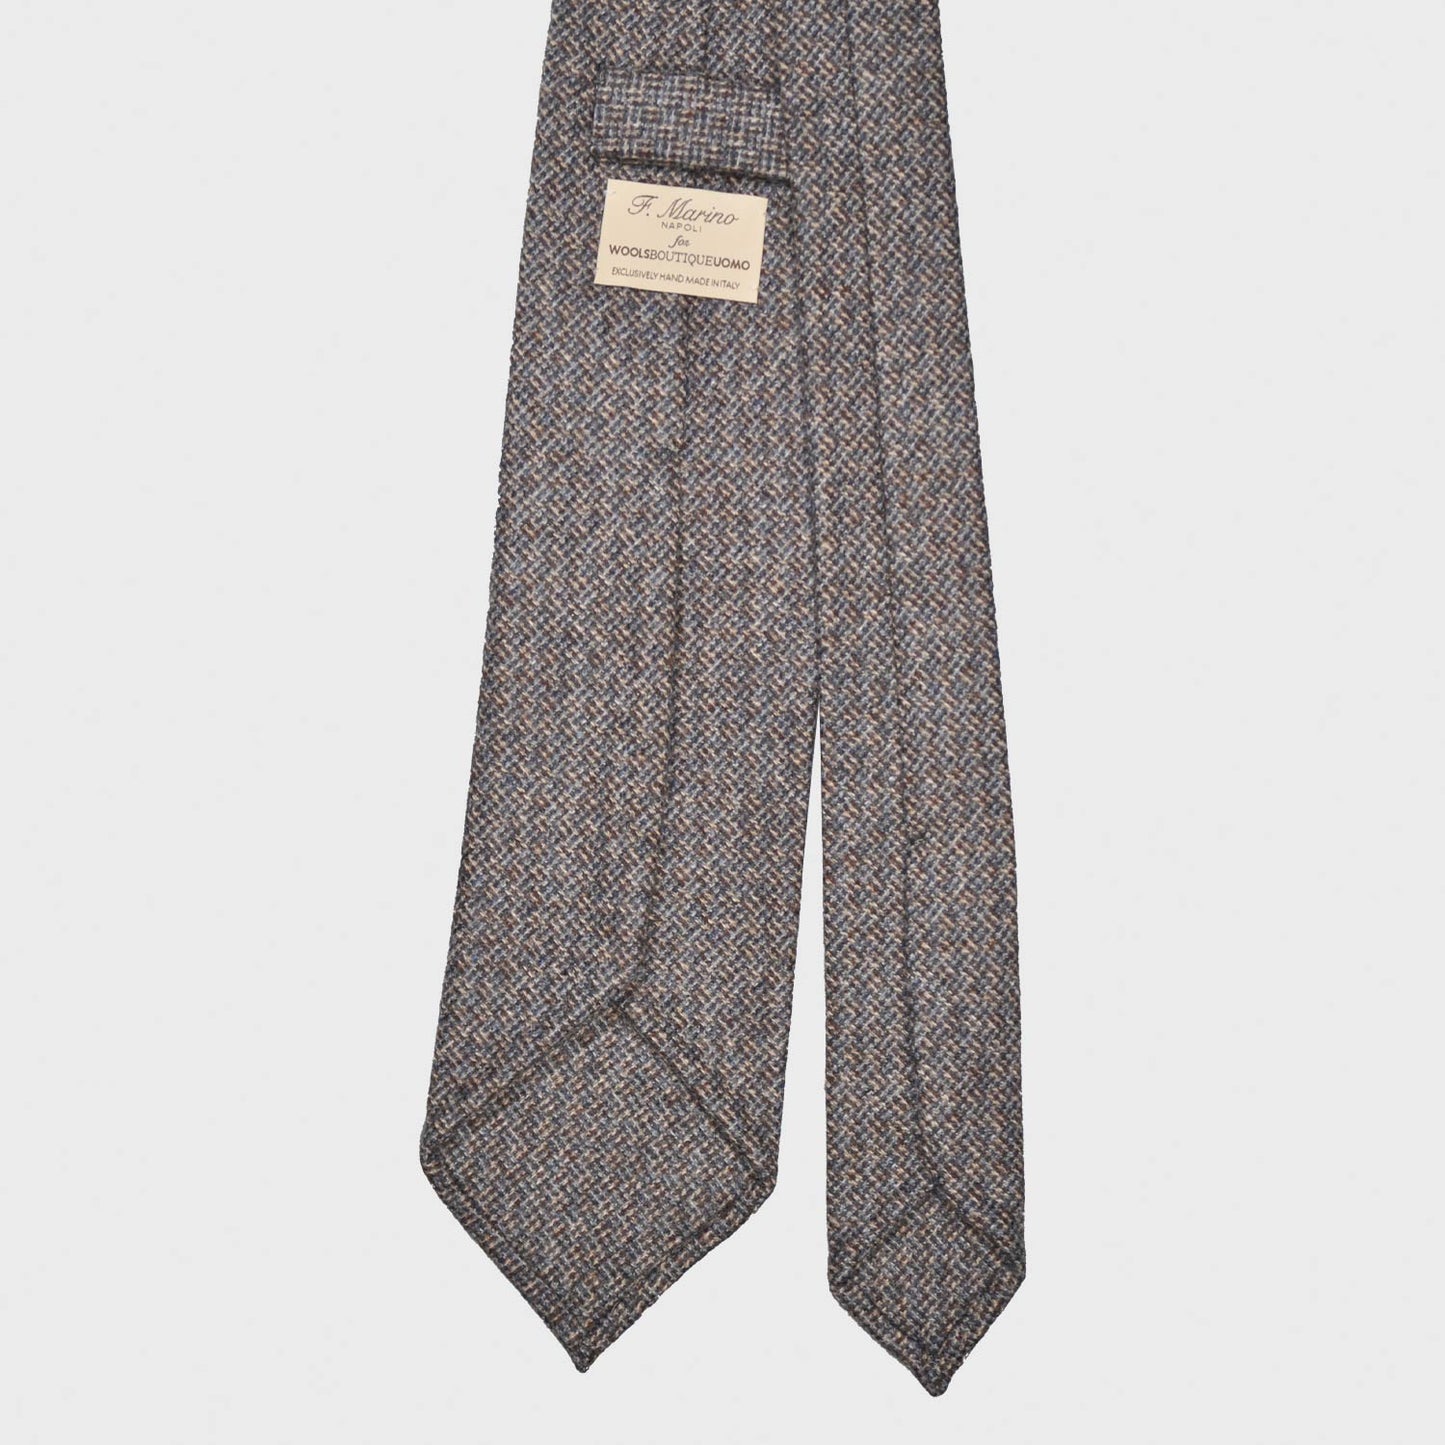 Load image into Gallery viewer, F.Marino Napoli Wool Tie 3 Folds Canvas Greige
